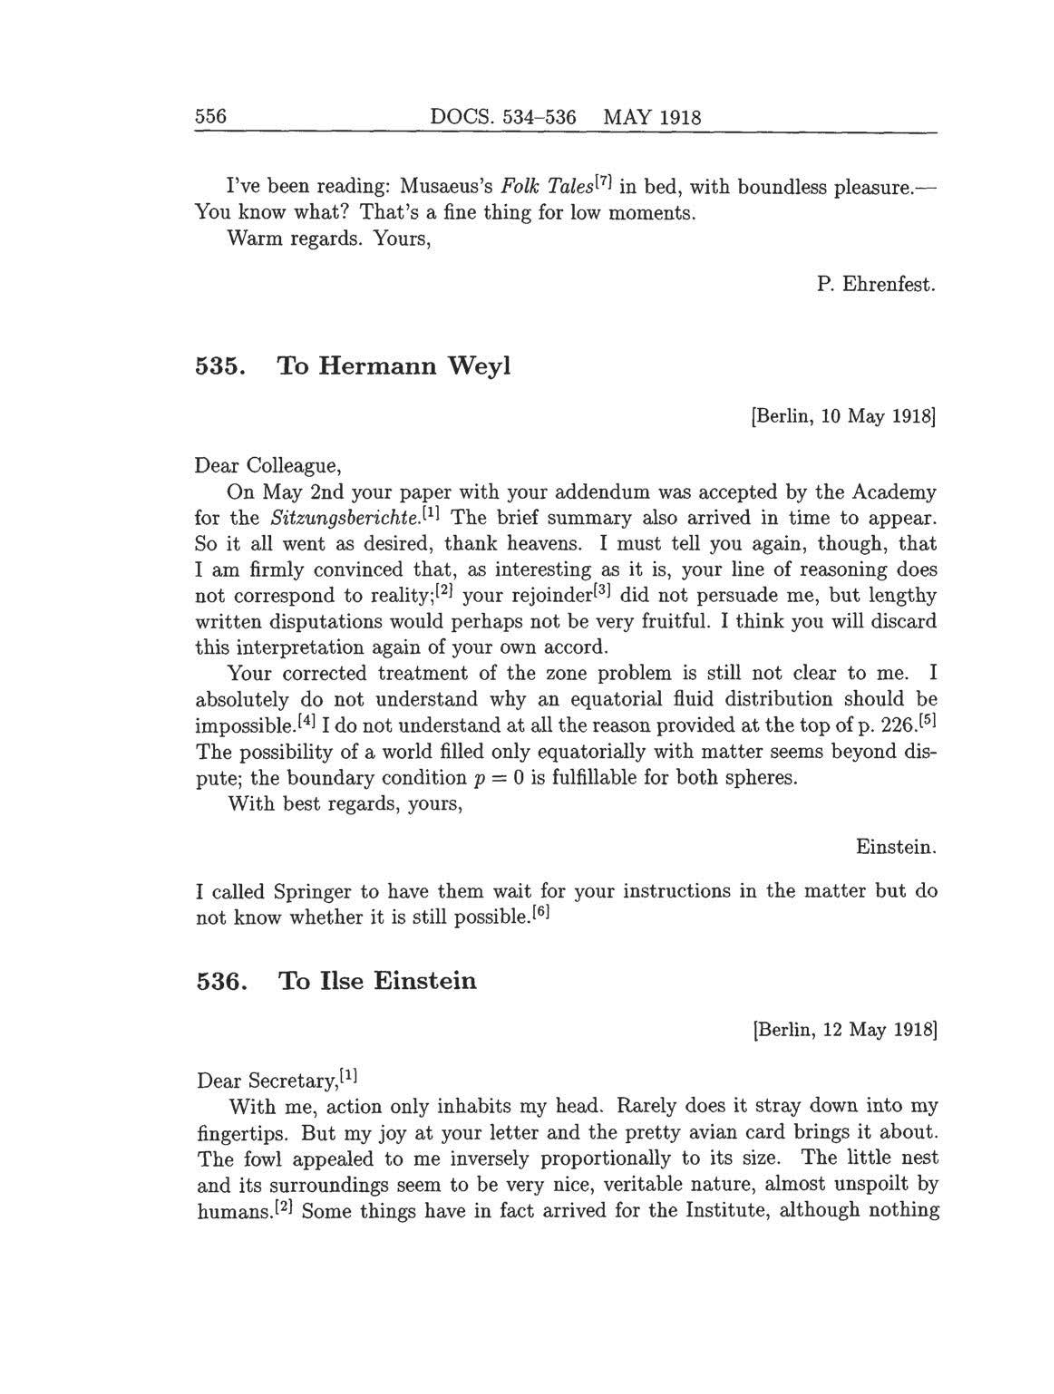 Volume 8: The Berlin Years: Correspondence, 1914-1918 (English translation supplement) page 556